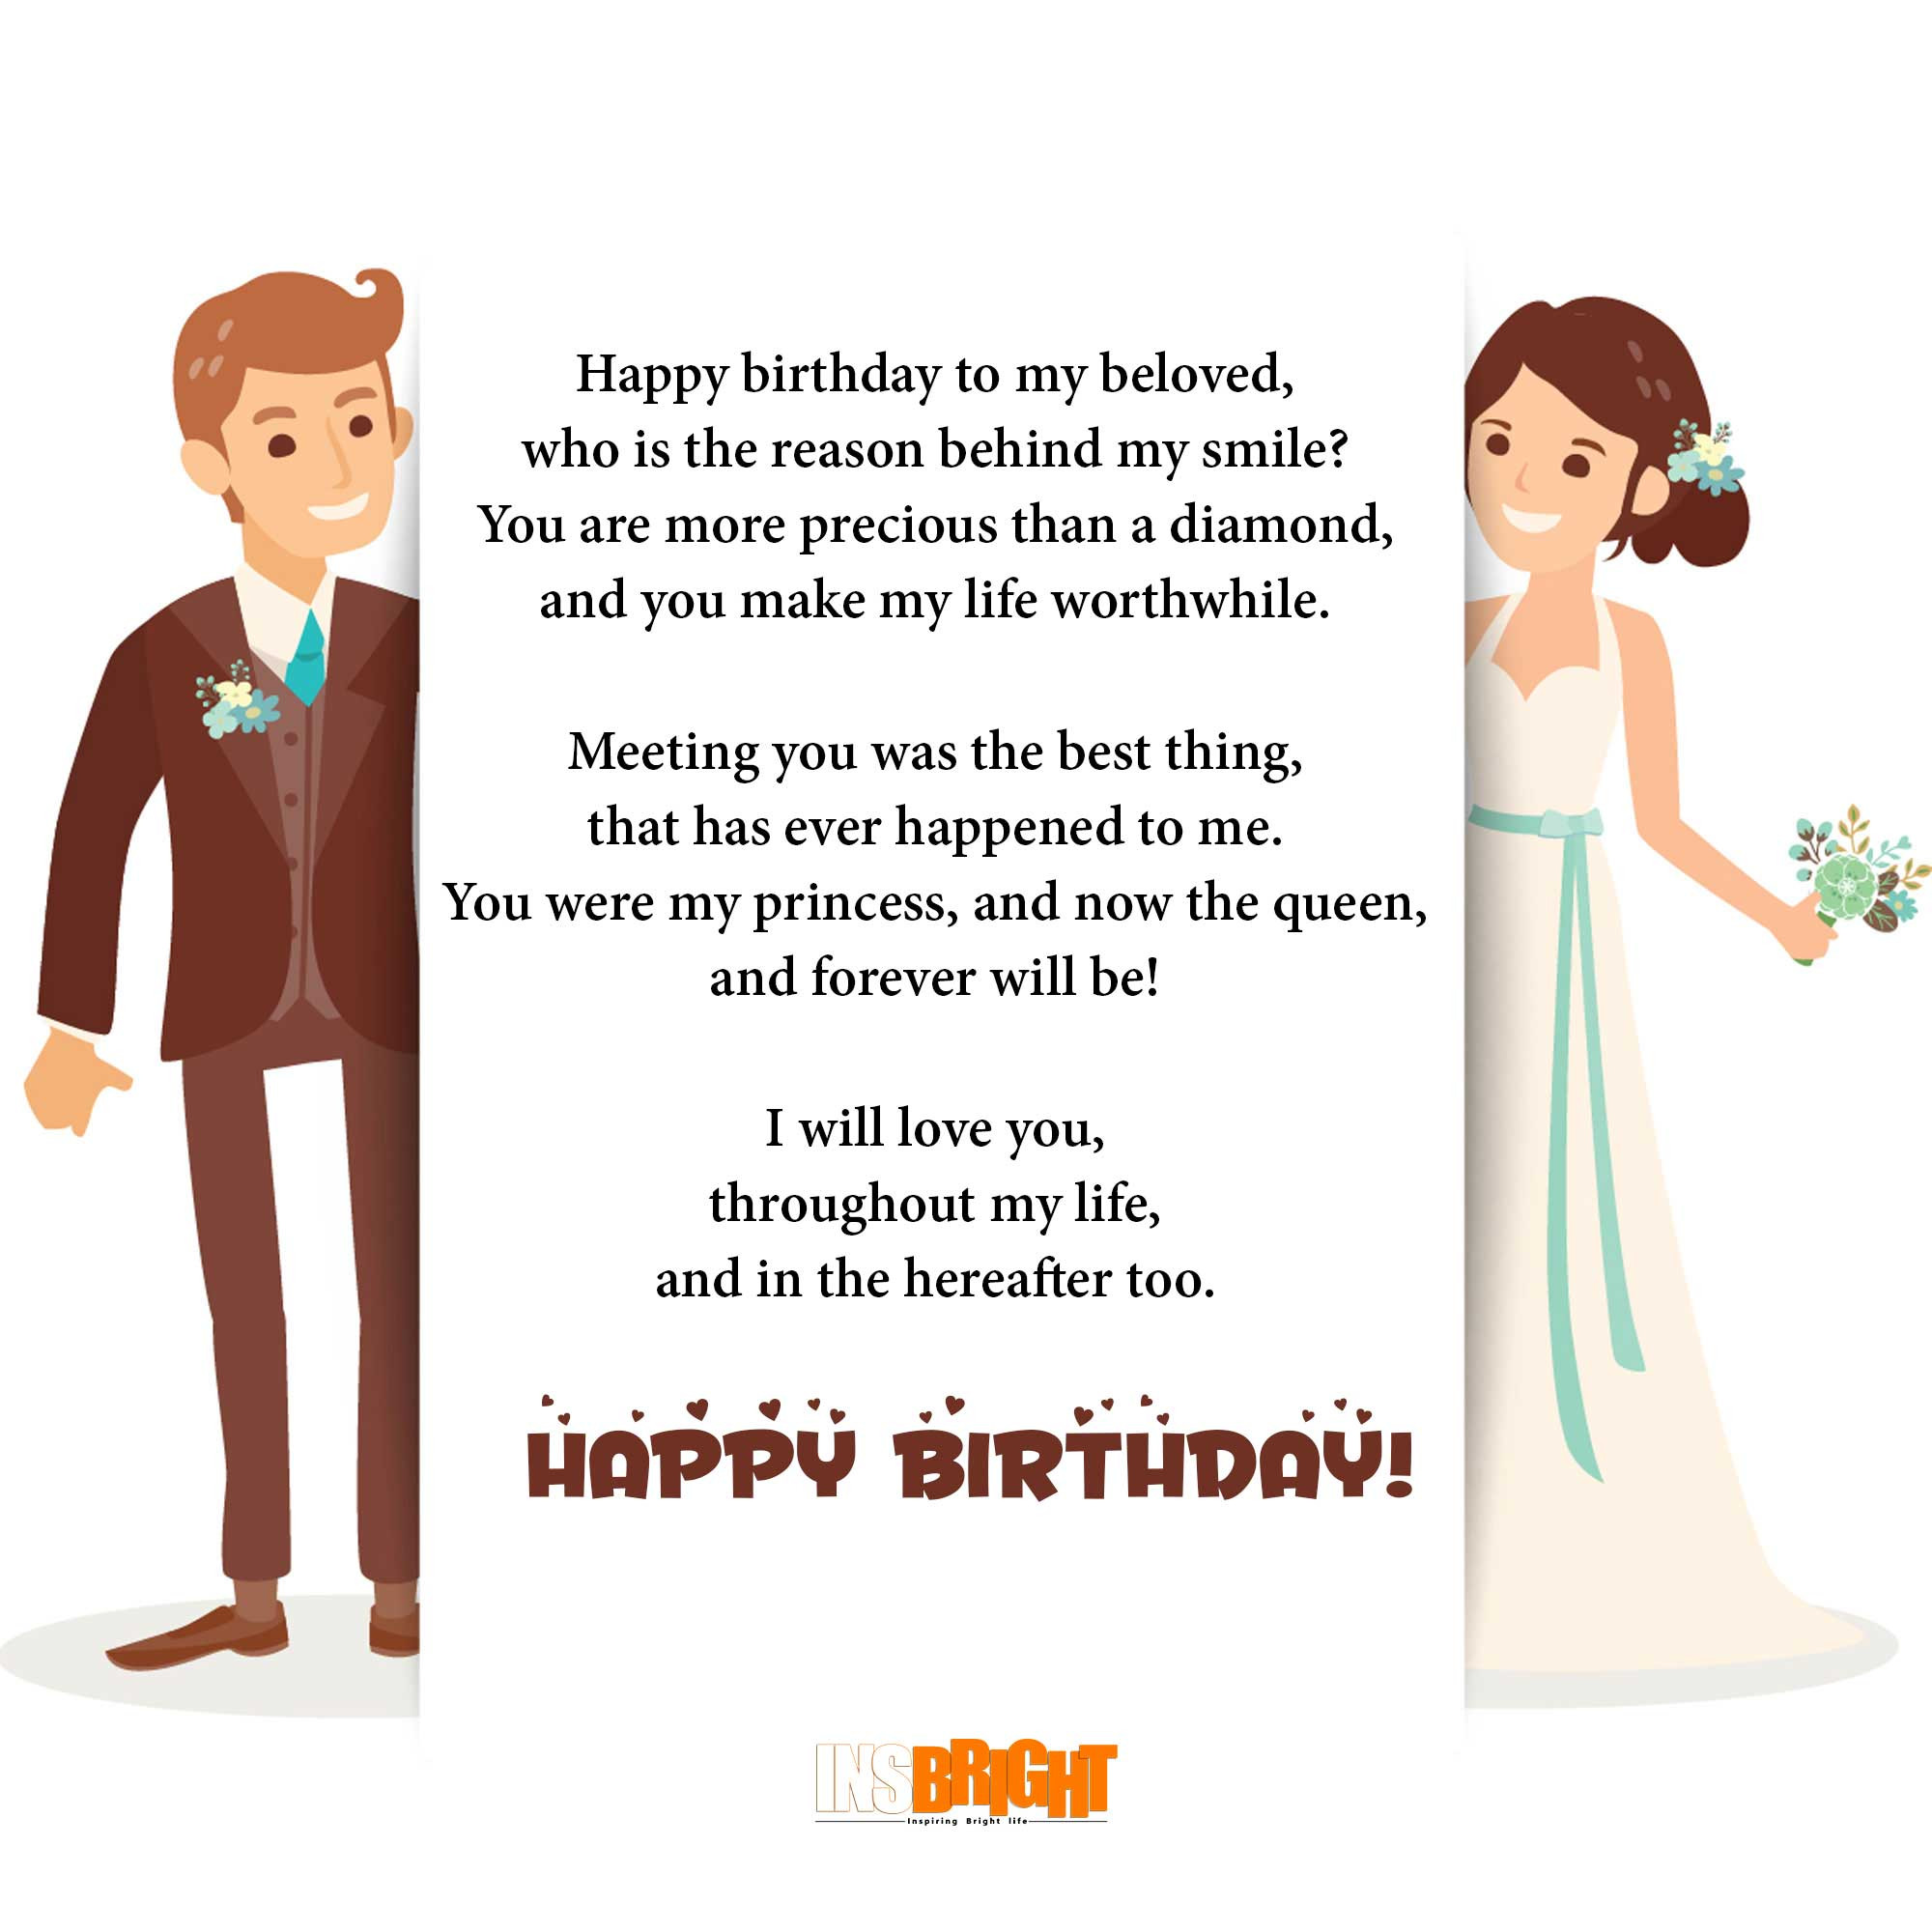 Birthday Quotes For Wife
 10 Romantic Happy Birthday Poems For Wife With Love From